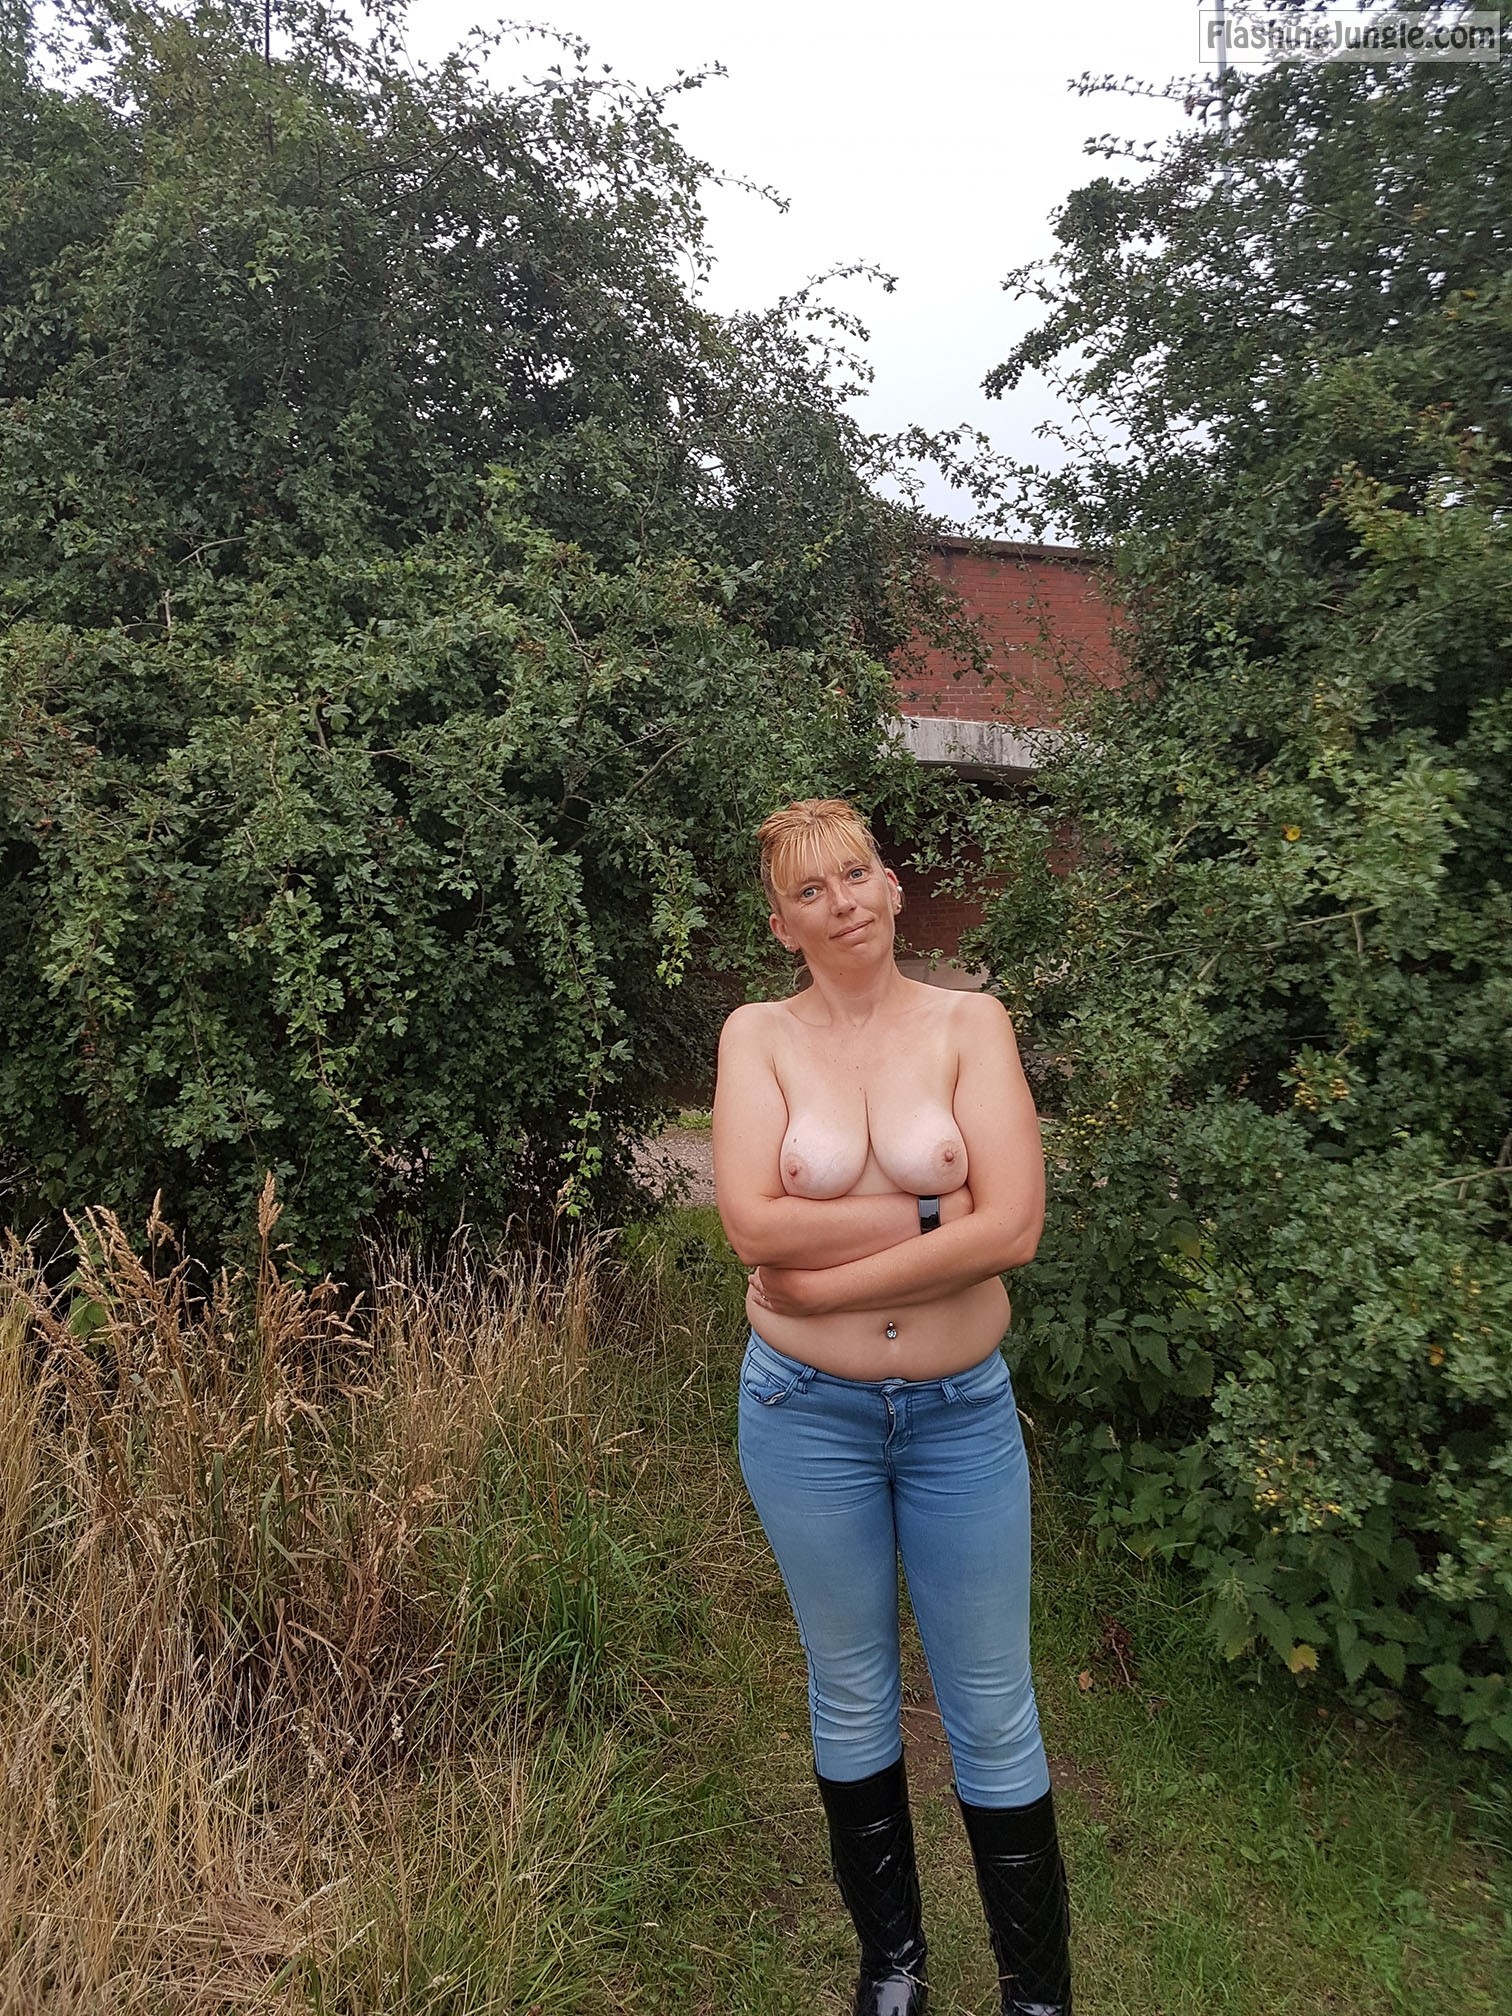 topless boobs shaking - Natural boobs topless in nature - MILF Flashing Pics